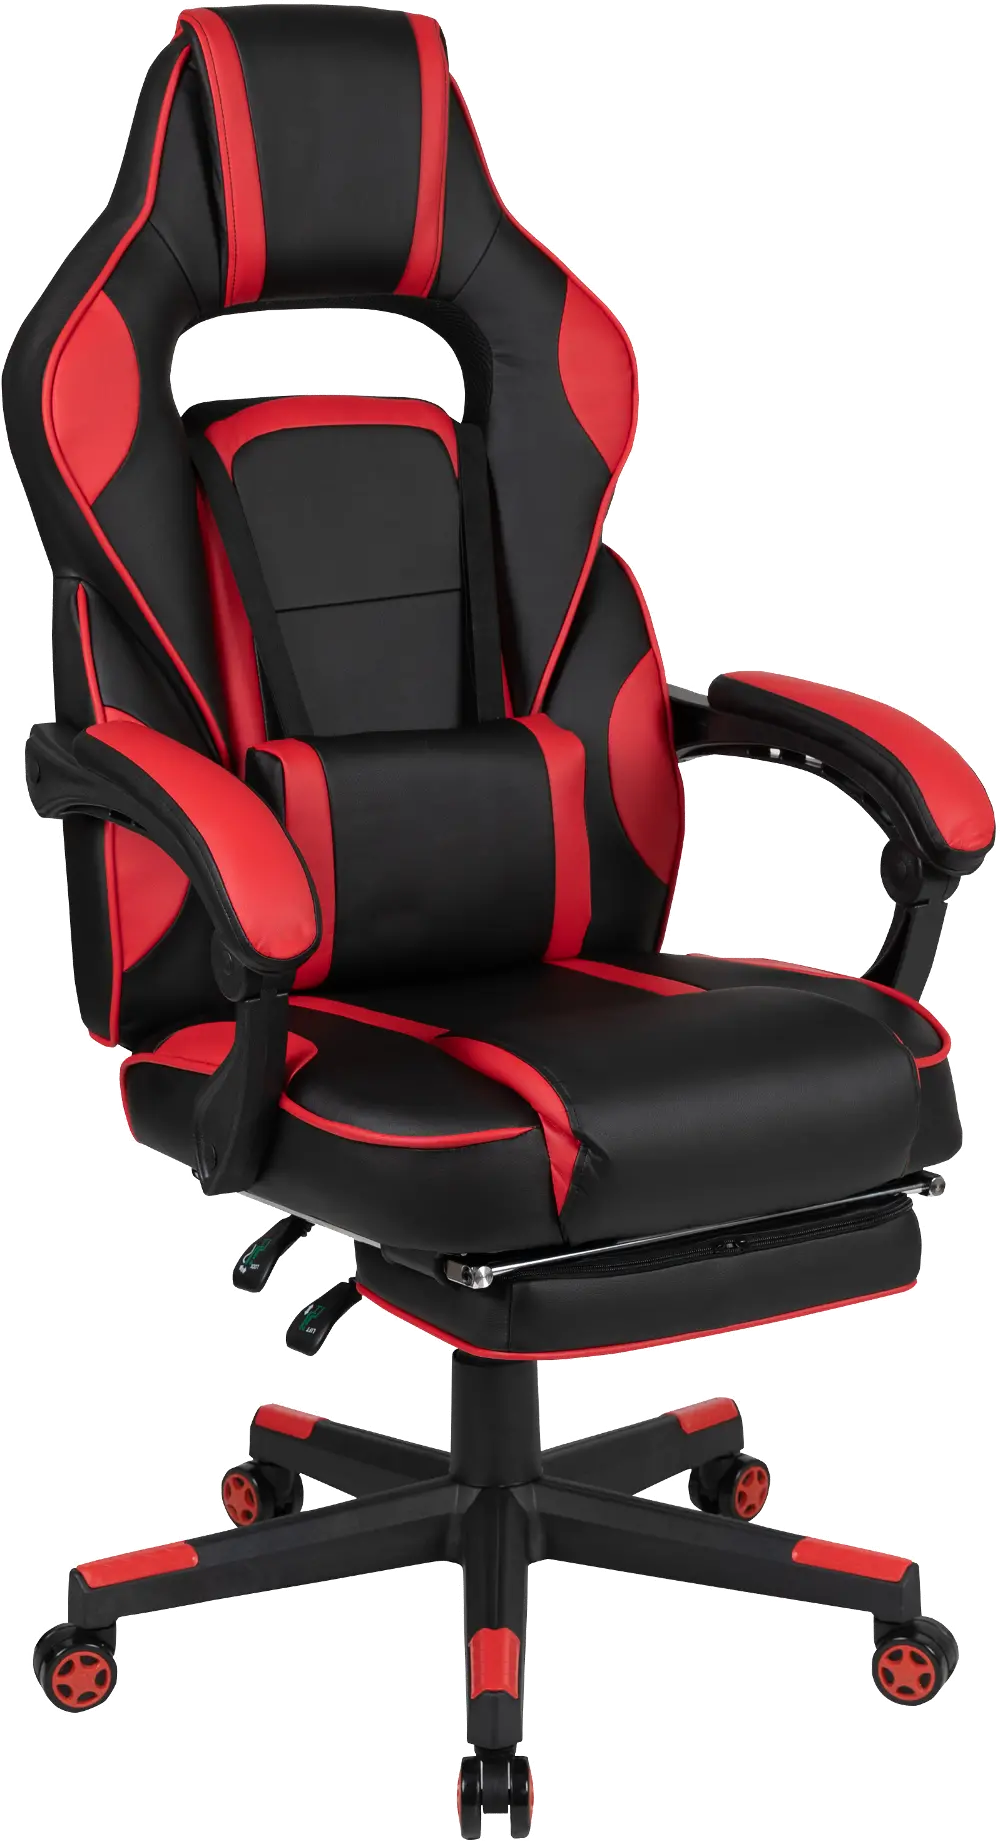 Red and Black Gaming Swivel Chair - X40-1